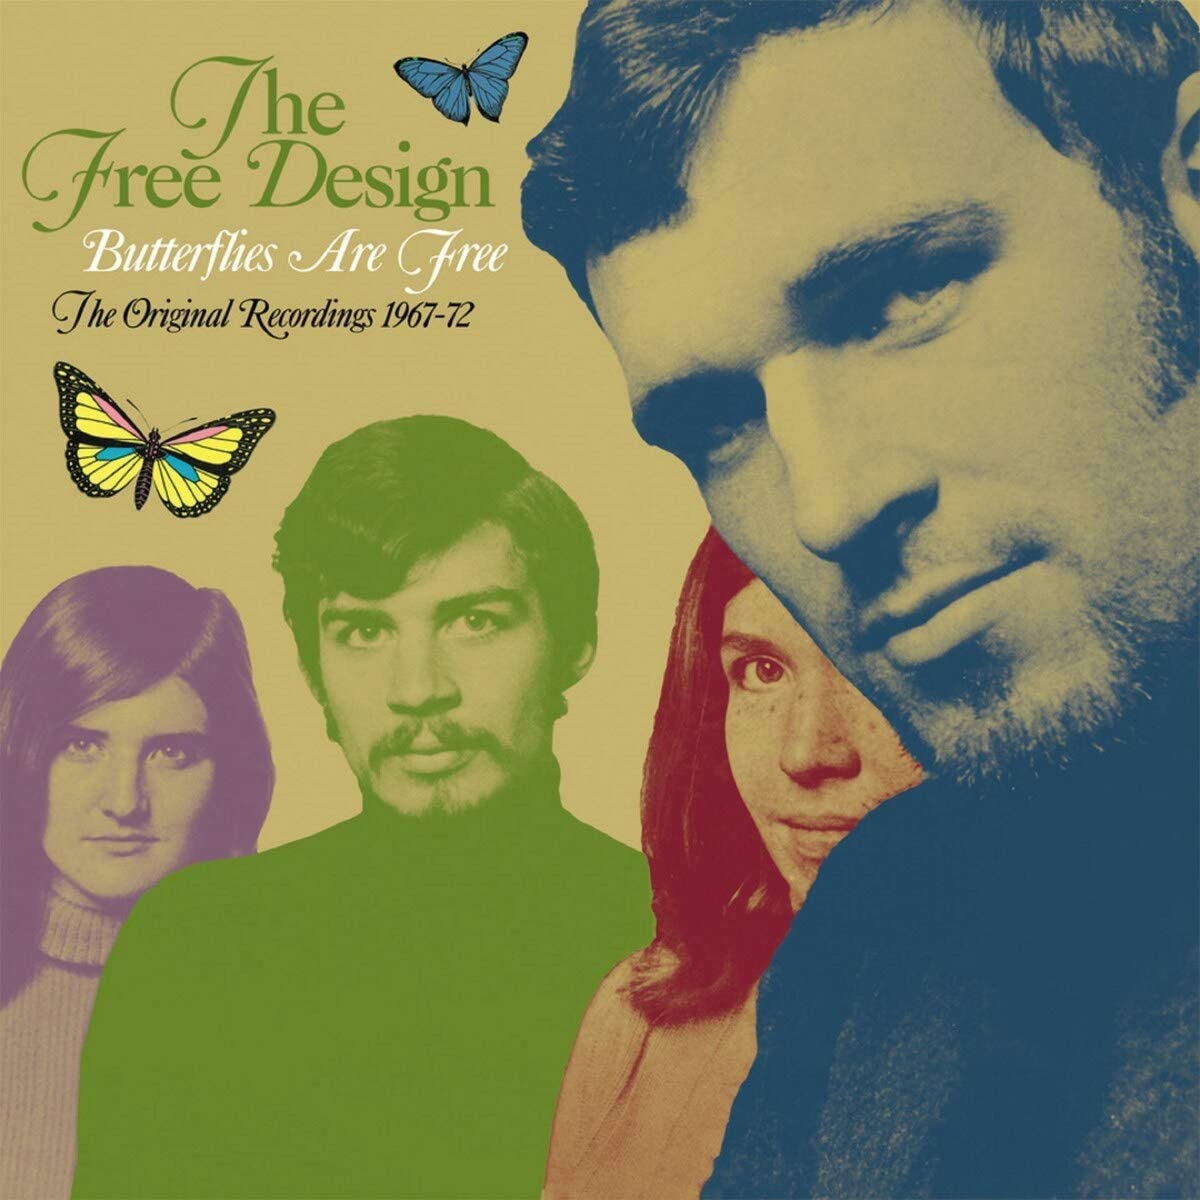 The Free Design - Butterflies Are Free: The Original Recordings 1967-72 - 4CD